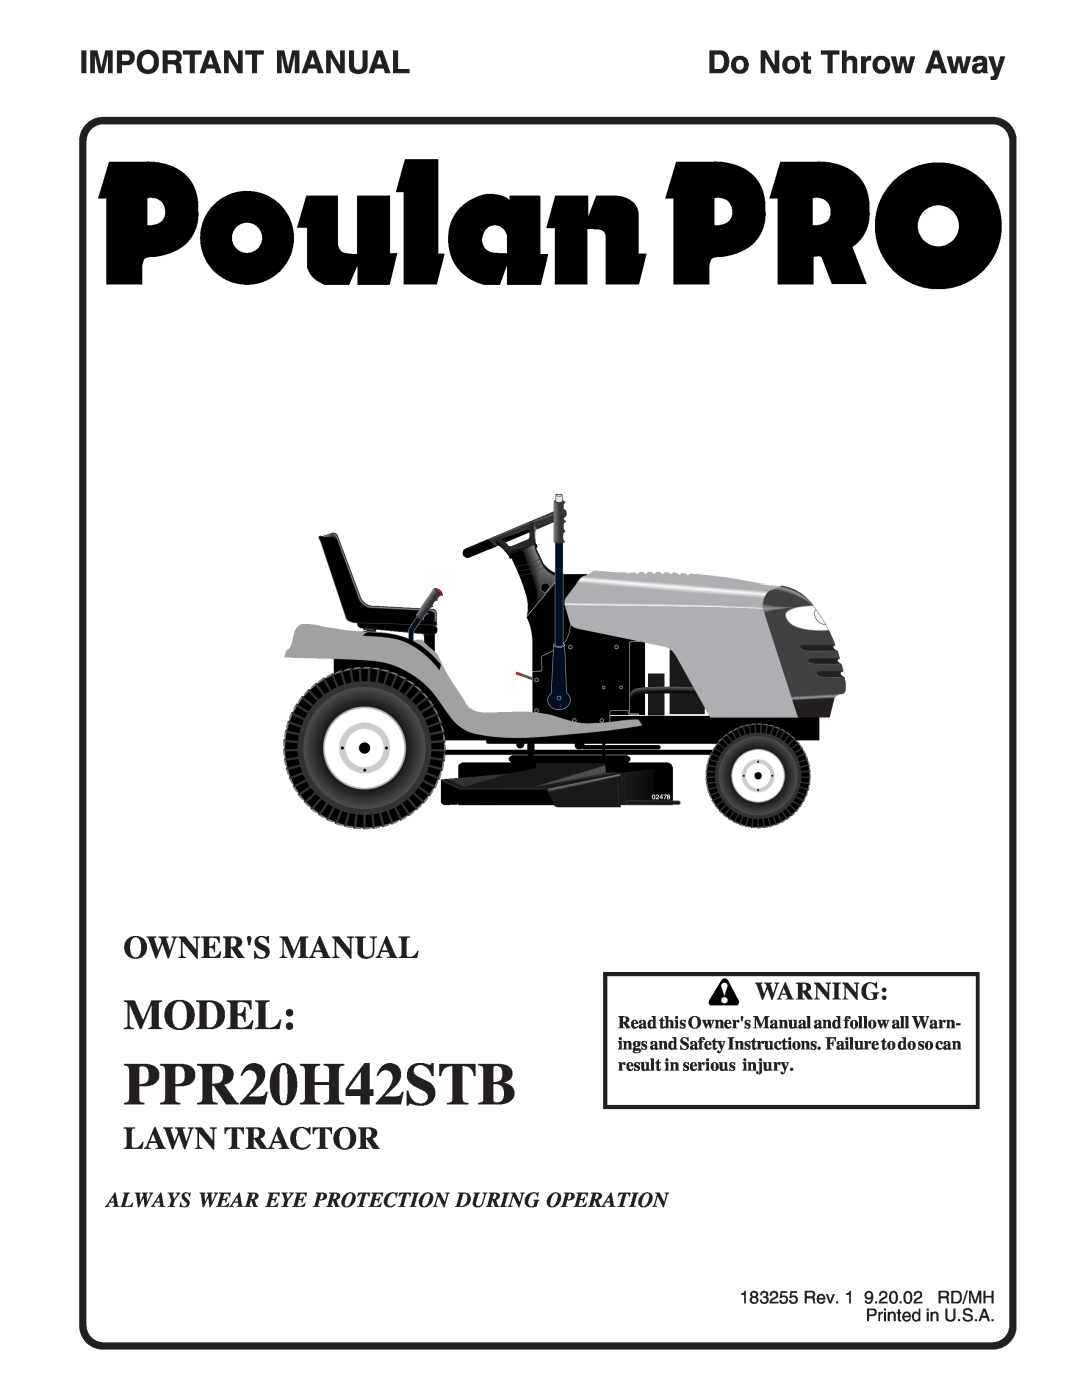 Poulan 183255 owner manual Model, Important Manual, PPR20H42STB, Owners Manual, Lawn Tractor, Do Not Throw Away, 02478 